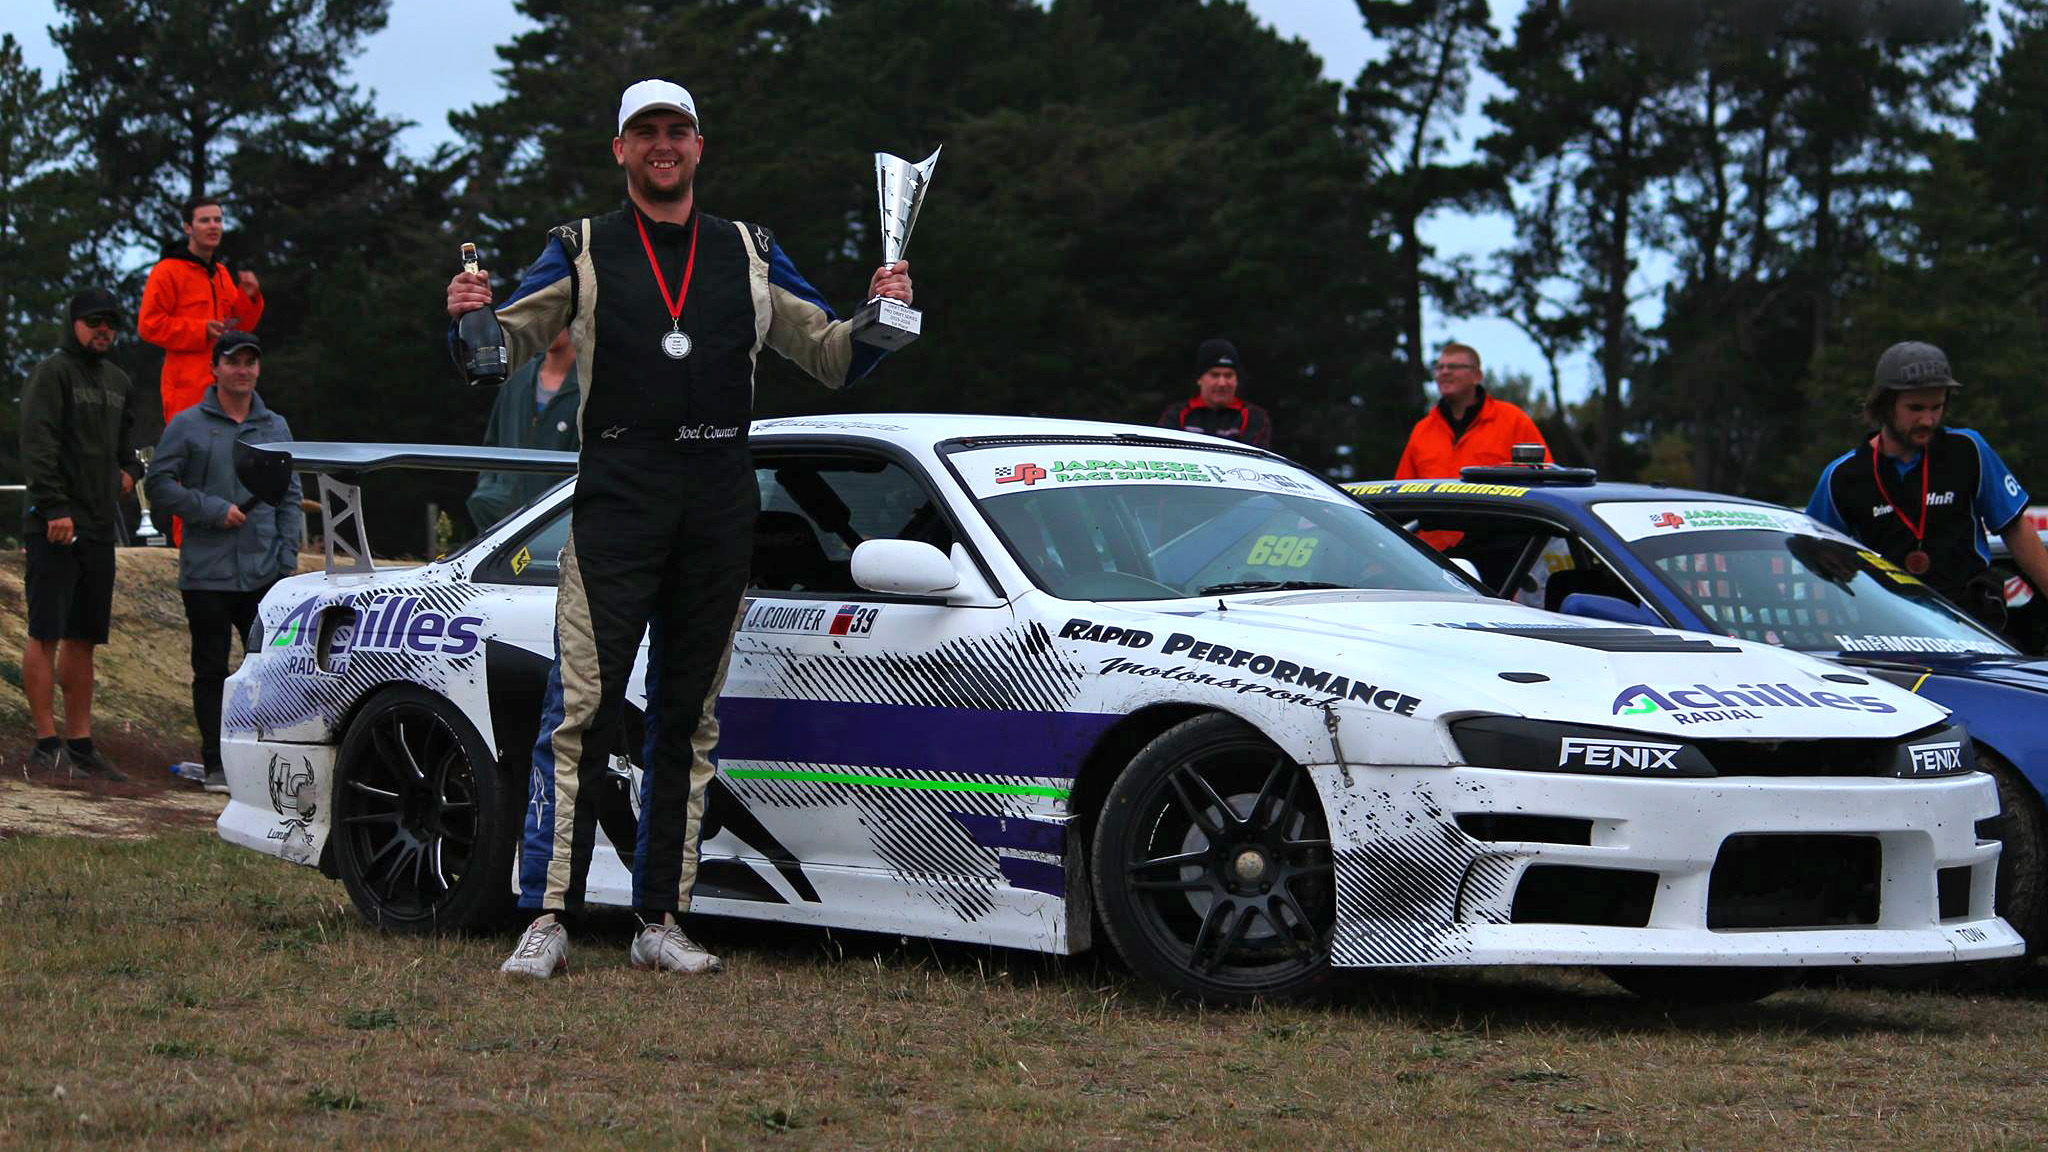 South Island drift champ expecting big crowds and big challenges